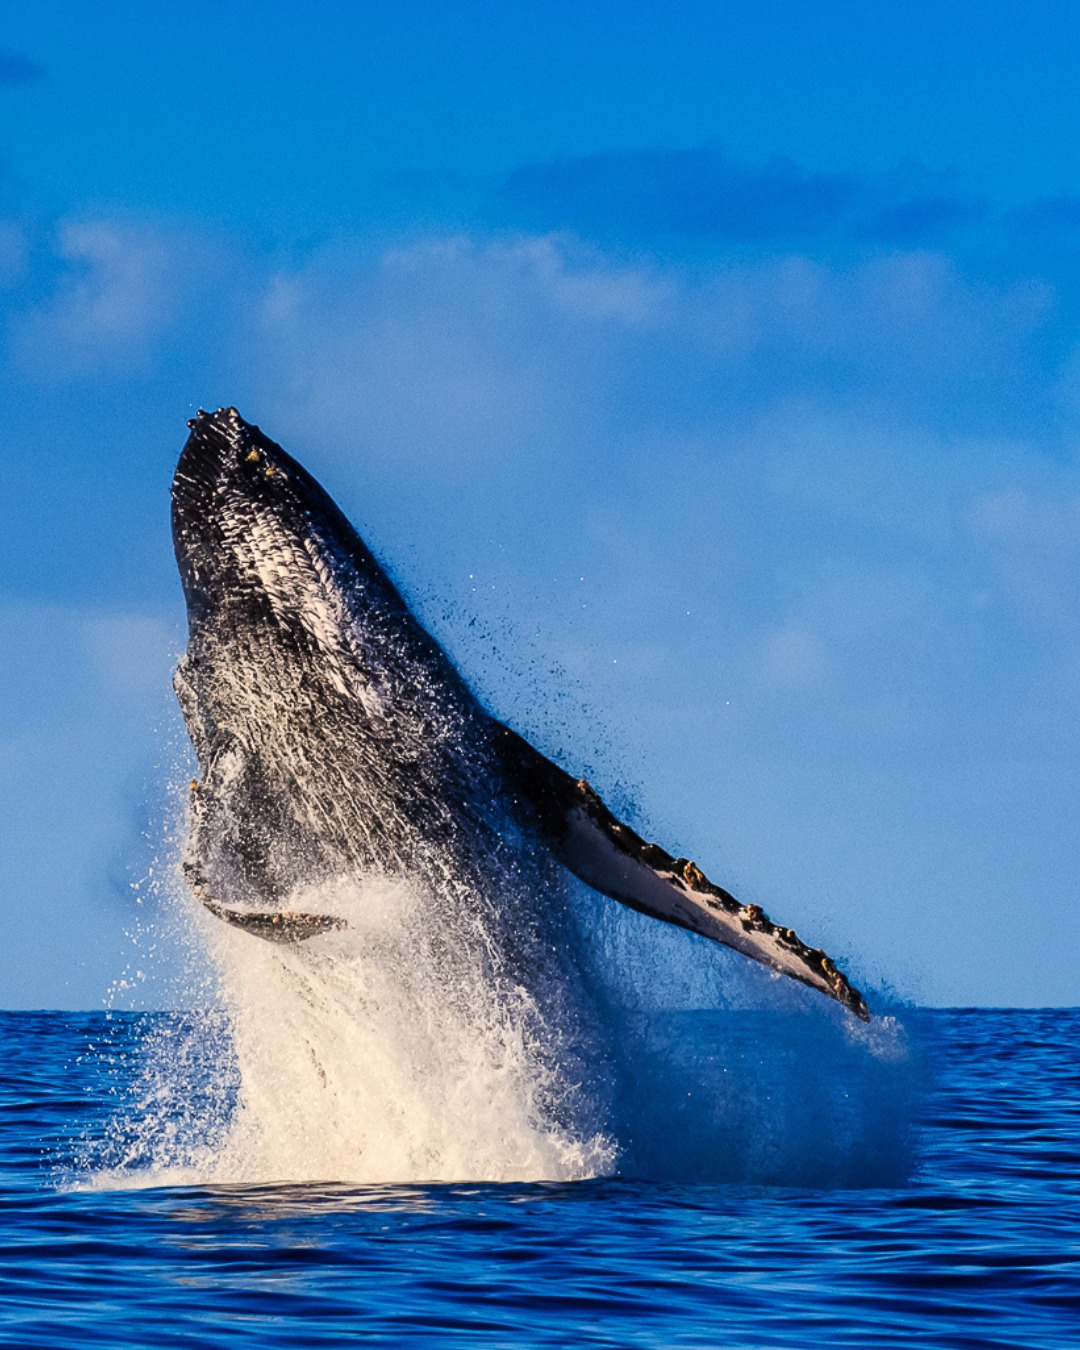 Watch whales for the experience of a lifetime